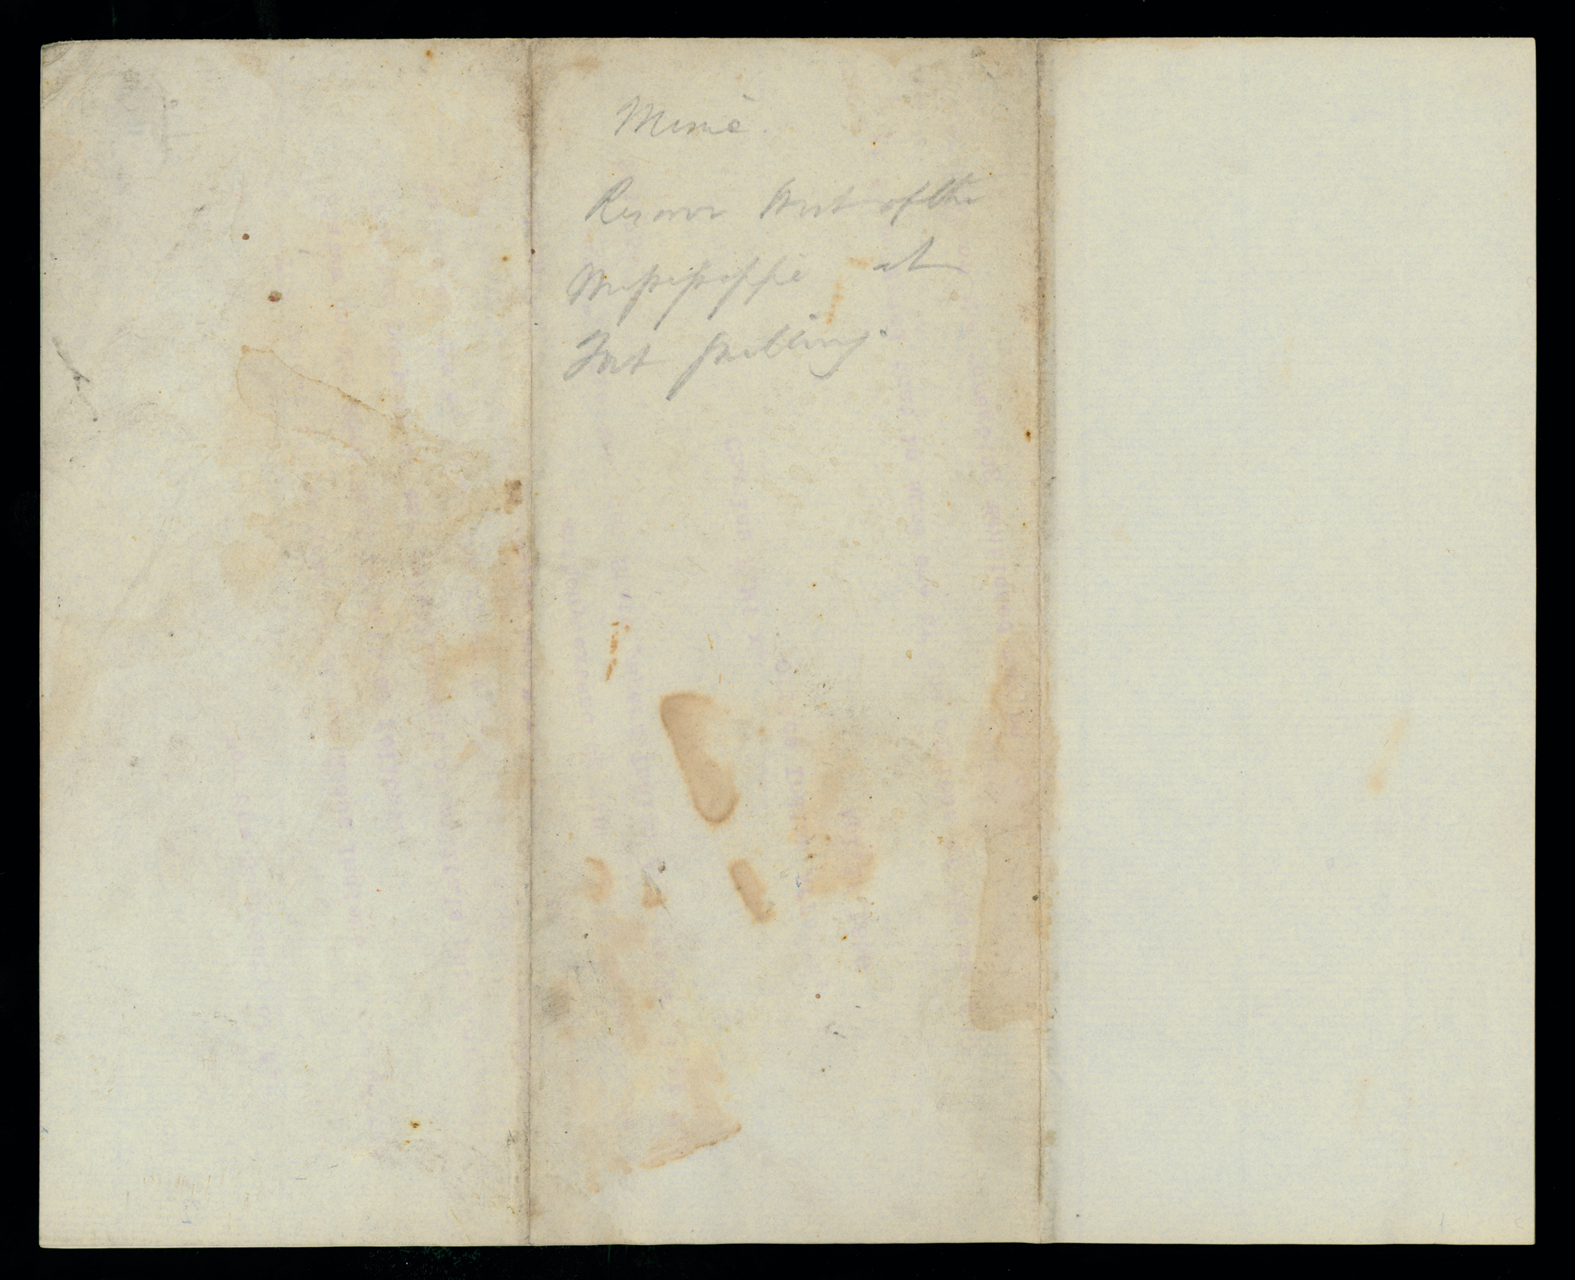 Note, Charles E. Mix, Office of Indian Affairs, to [George W. Crawford], n. p., Page 2